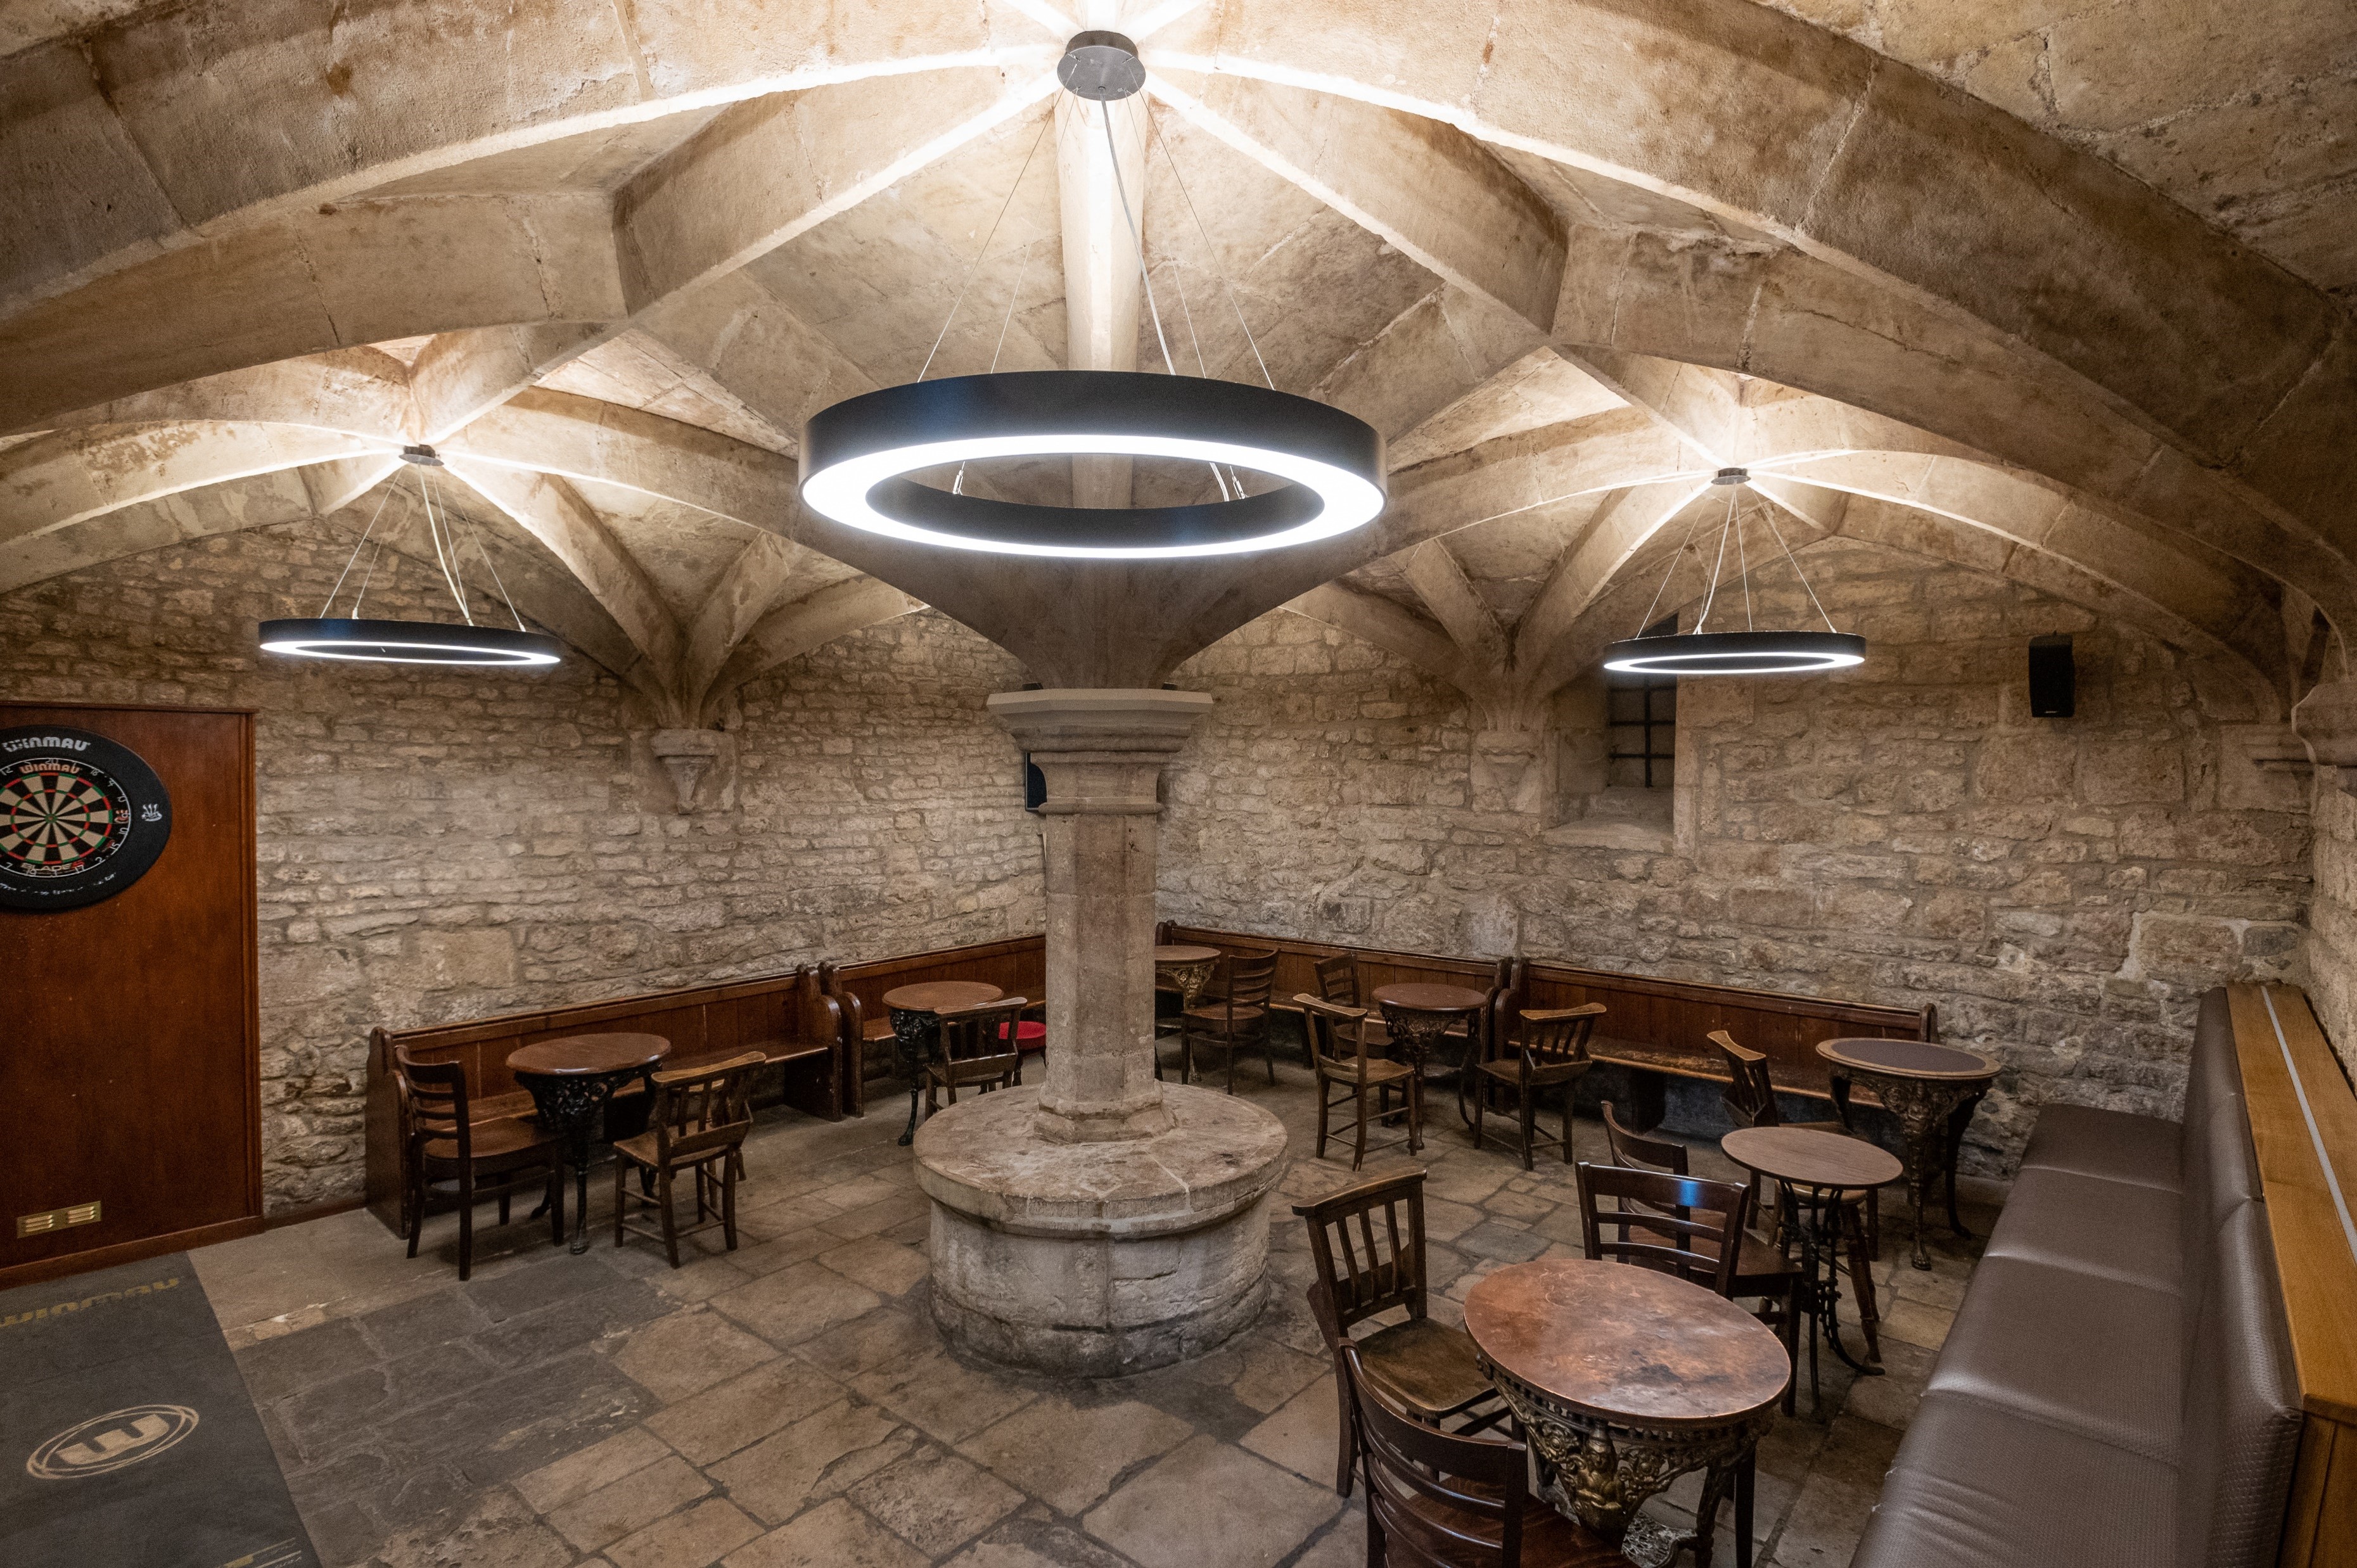 Bar seating in old beer cellar with dart board